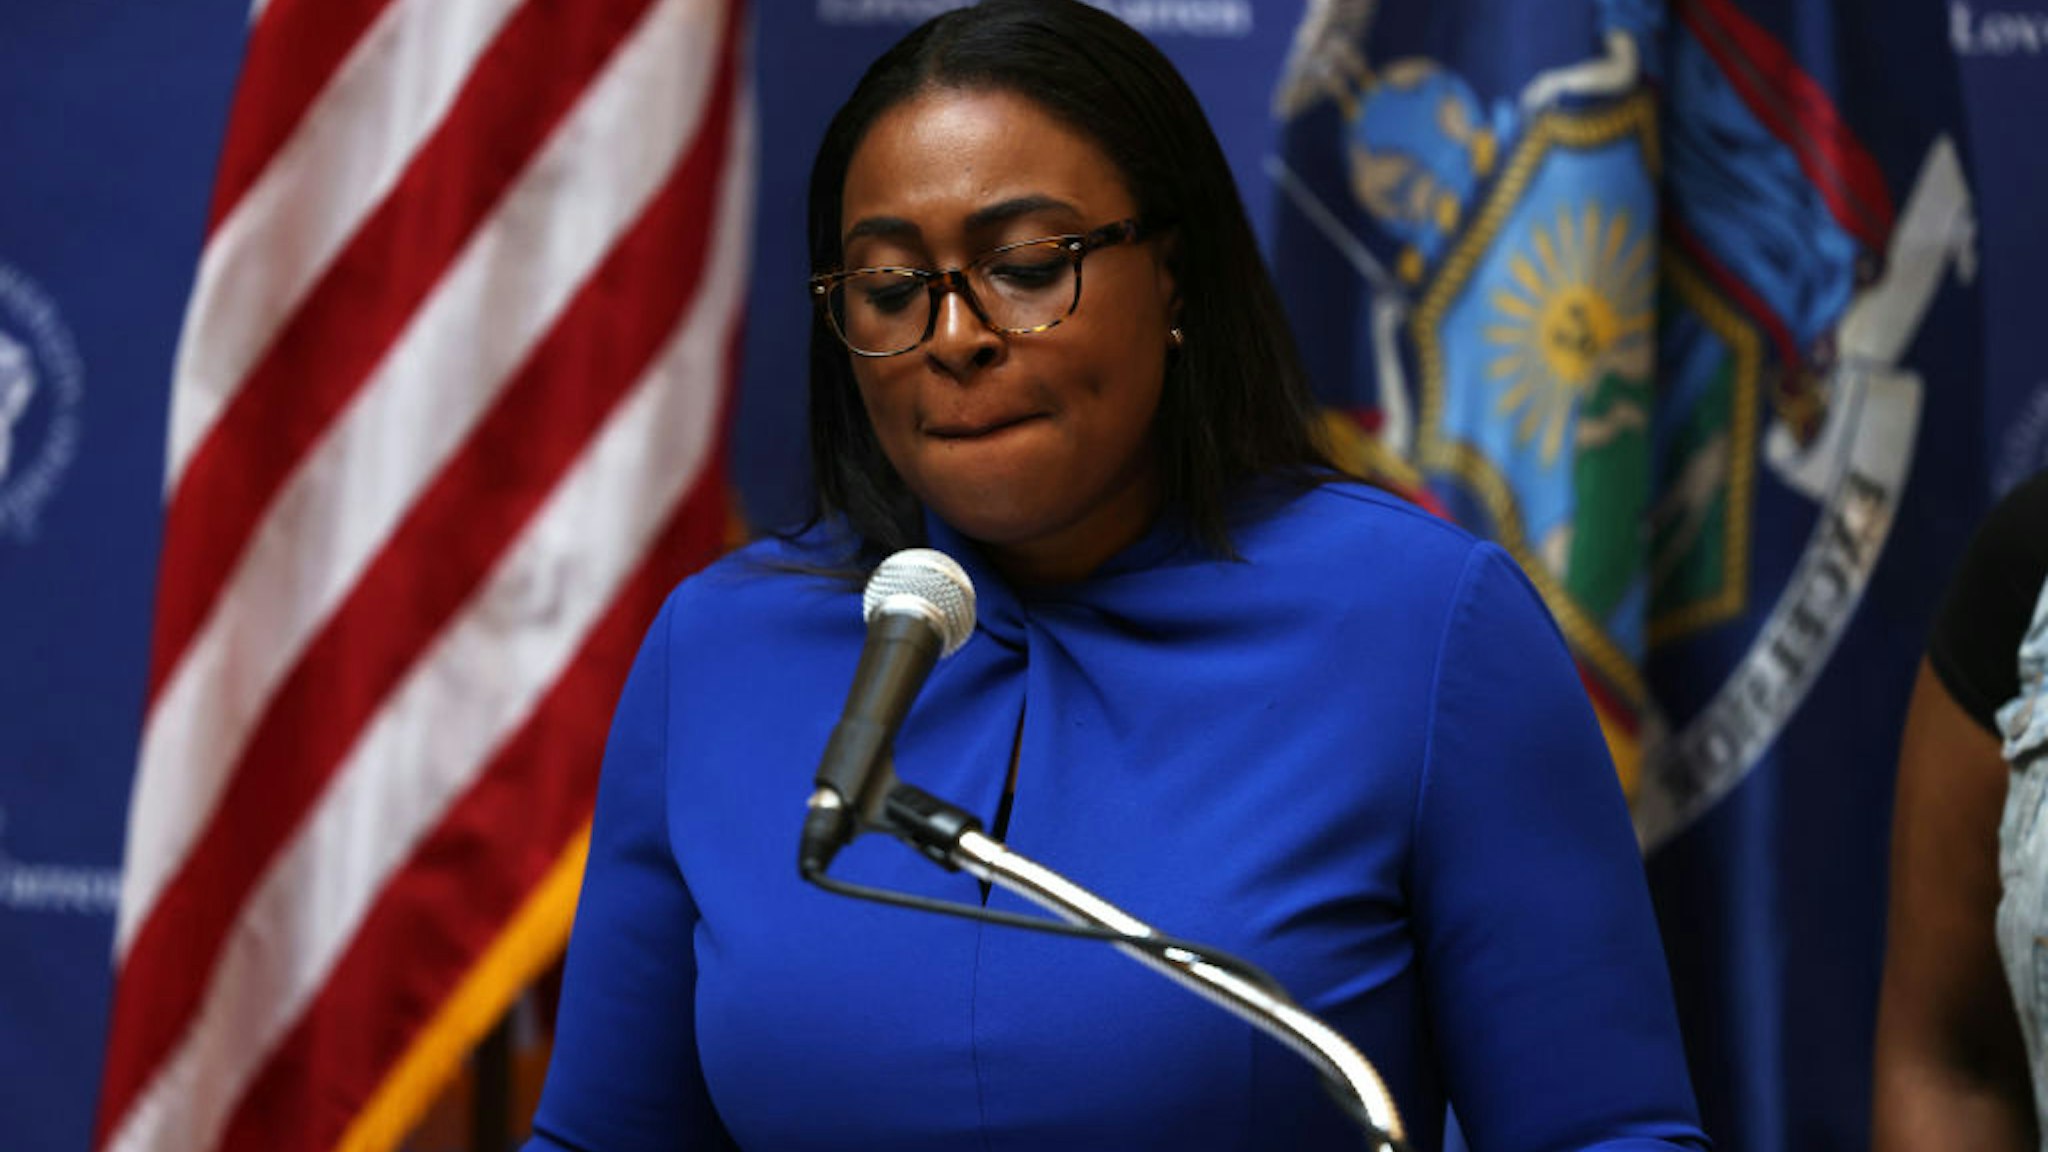 Lovely A. Warren, mayor of Rochester, speaks during a press conference on the death of Daniel Prude on September 03, 2020 in Rochester, New York.